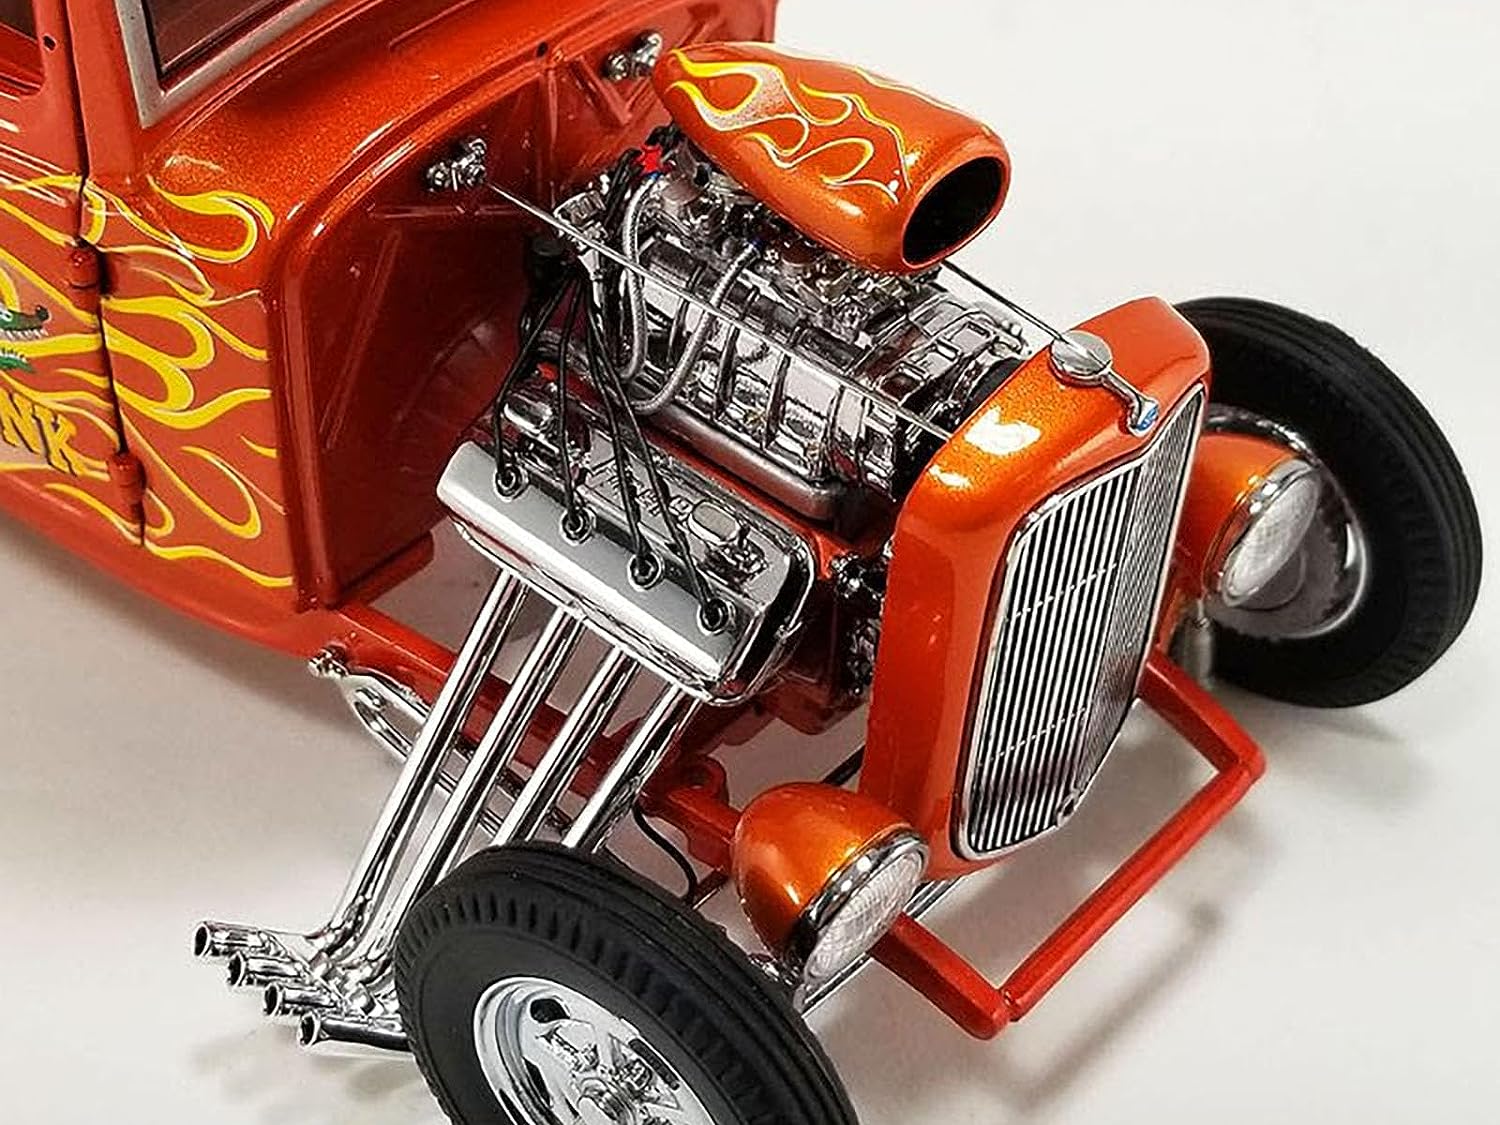 1932 blown hot rod pickup truck review